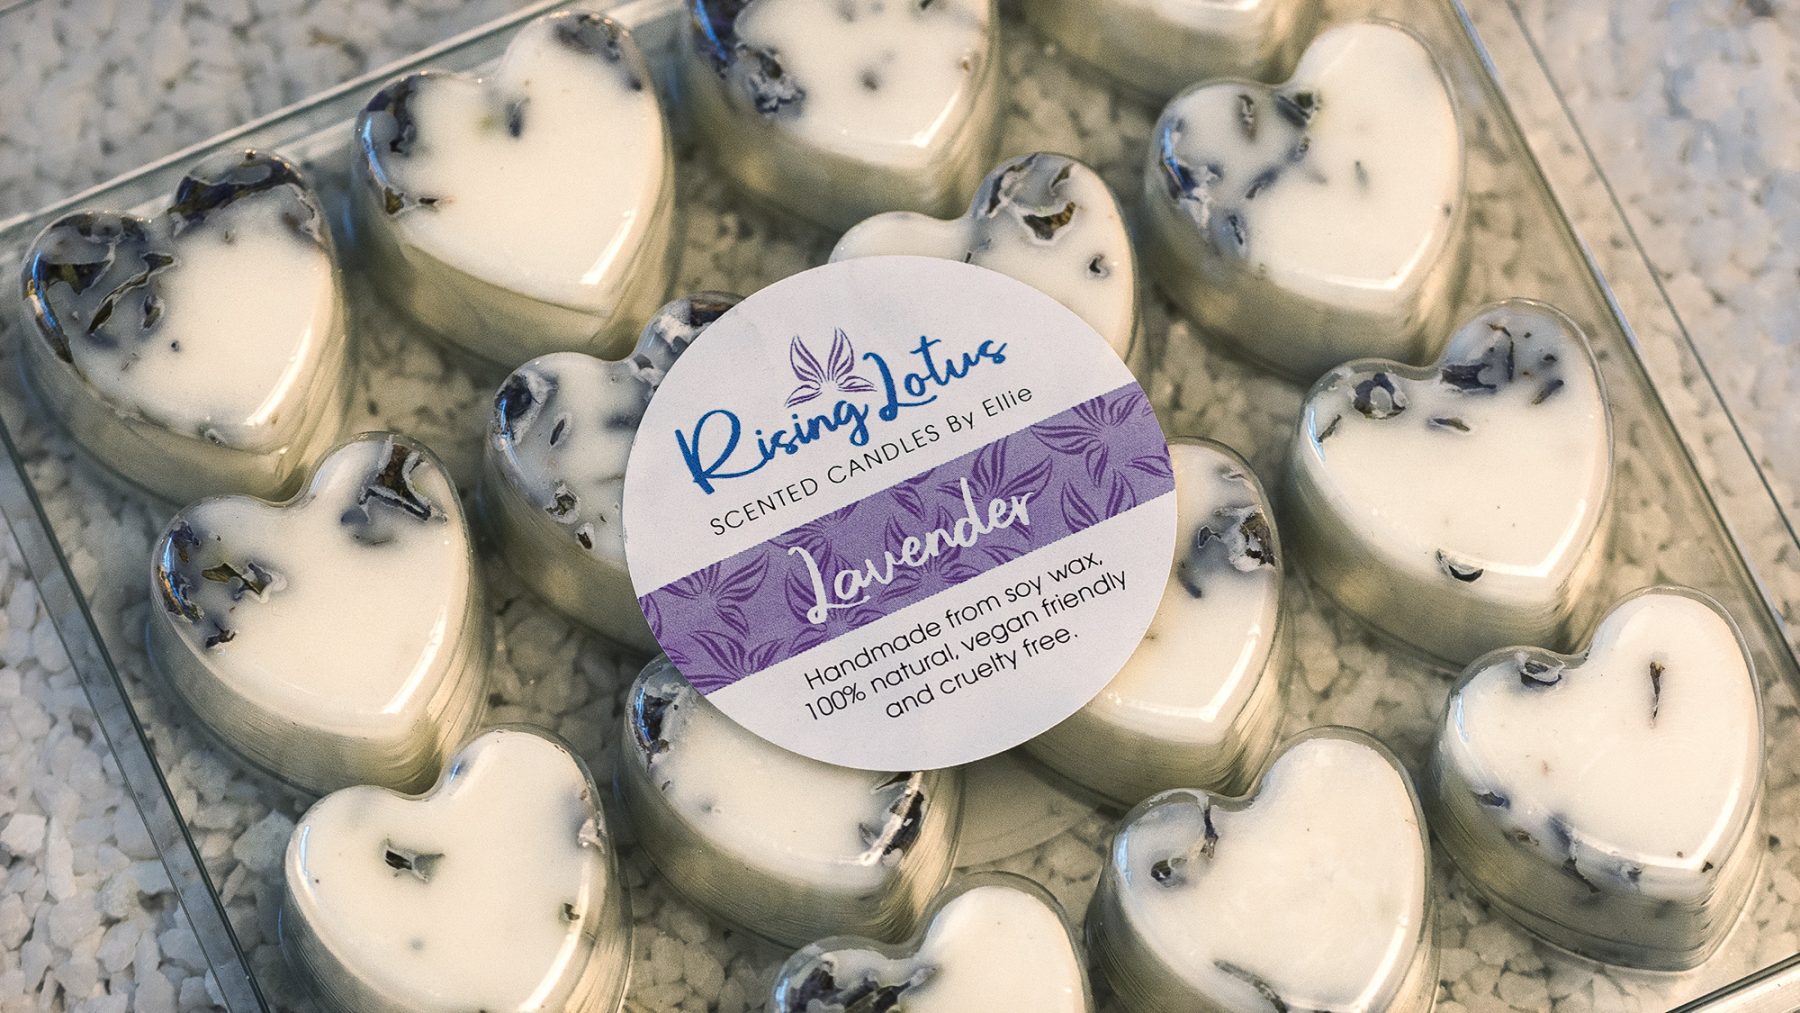 Heart-shaped lavender-scented wax melts